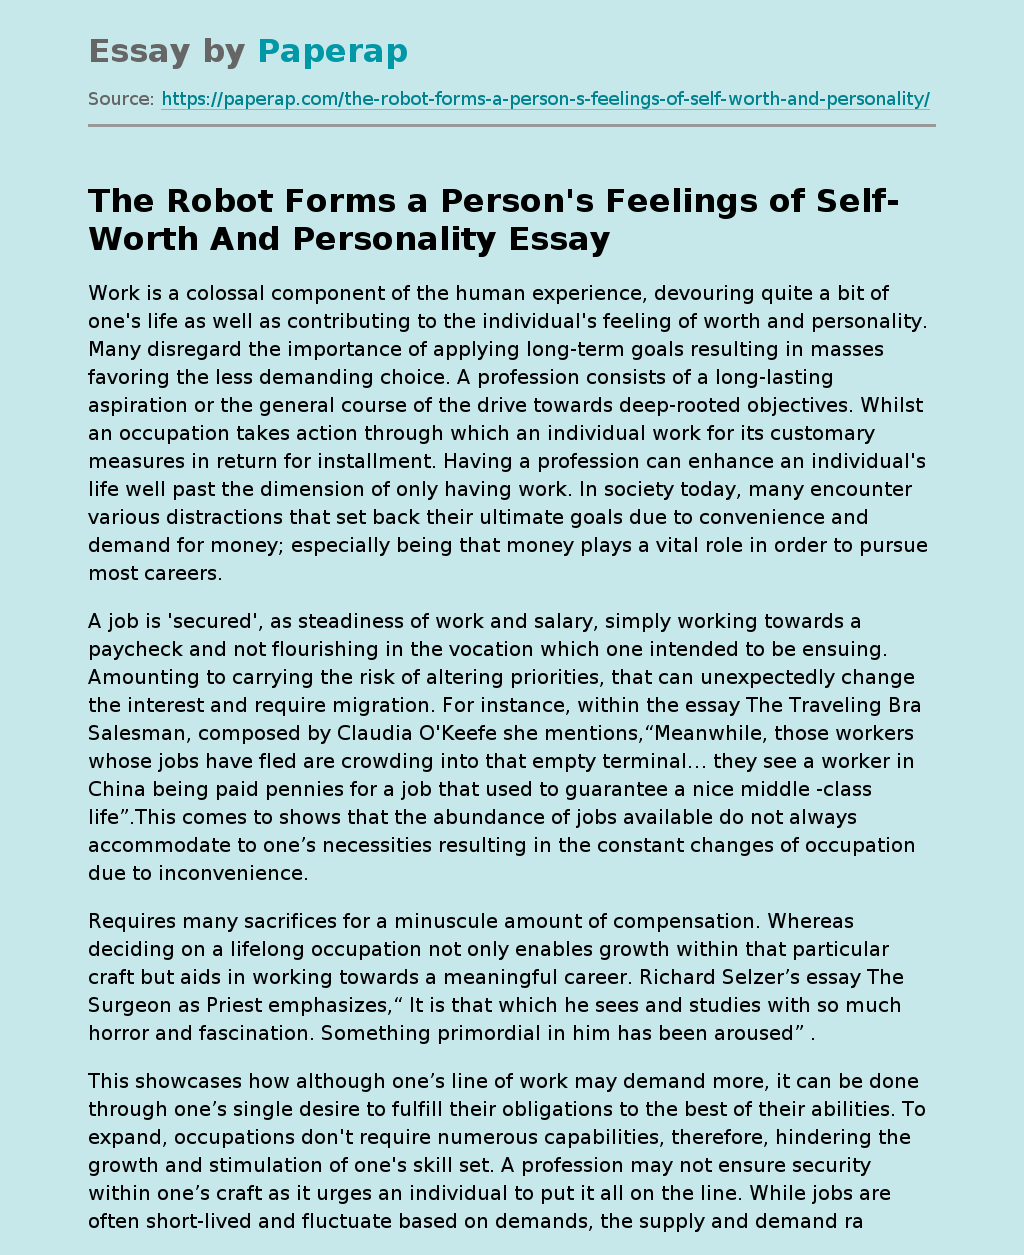 The Robot Forms a Person's Feelings of Self-Worth And Personality